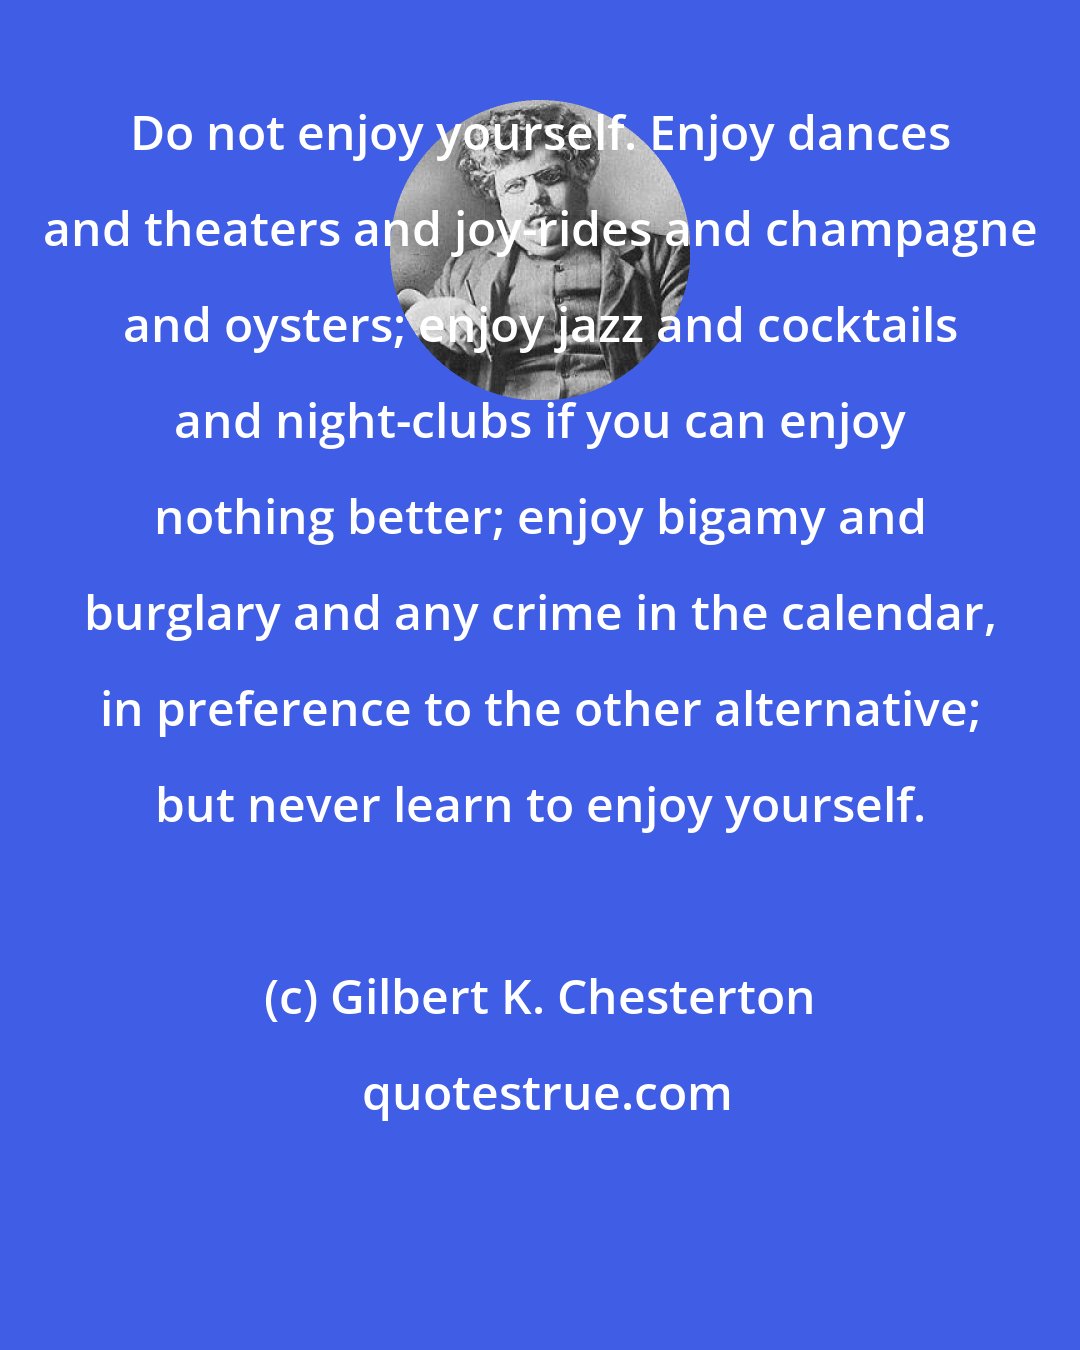 Gilbert K. Chesterton: Do not enjoy yourself. Enjoy dances and theaters and joy-rides and champagne and oysters; enjoy jazz and cocktails and night-clubs if you can enjoy nothing better; enjoy bigamy and burglary and any crime in the calendar, in preference to the other alternative; but never learn to enjoy yourself.